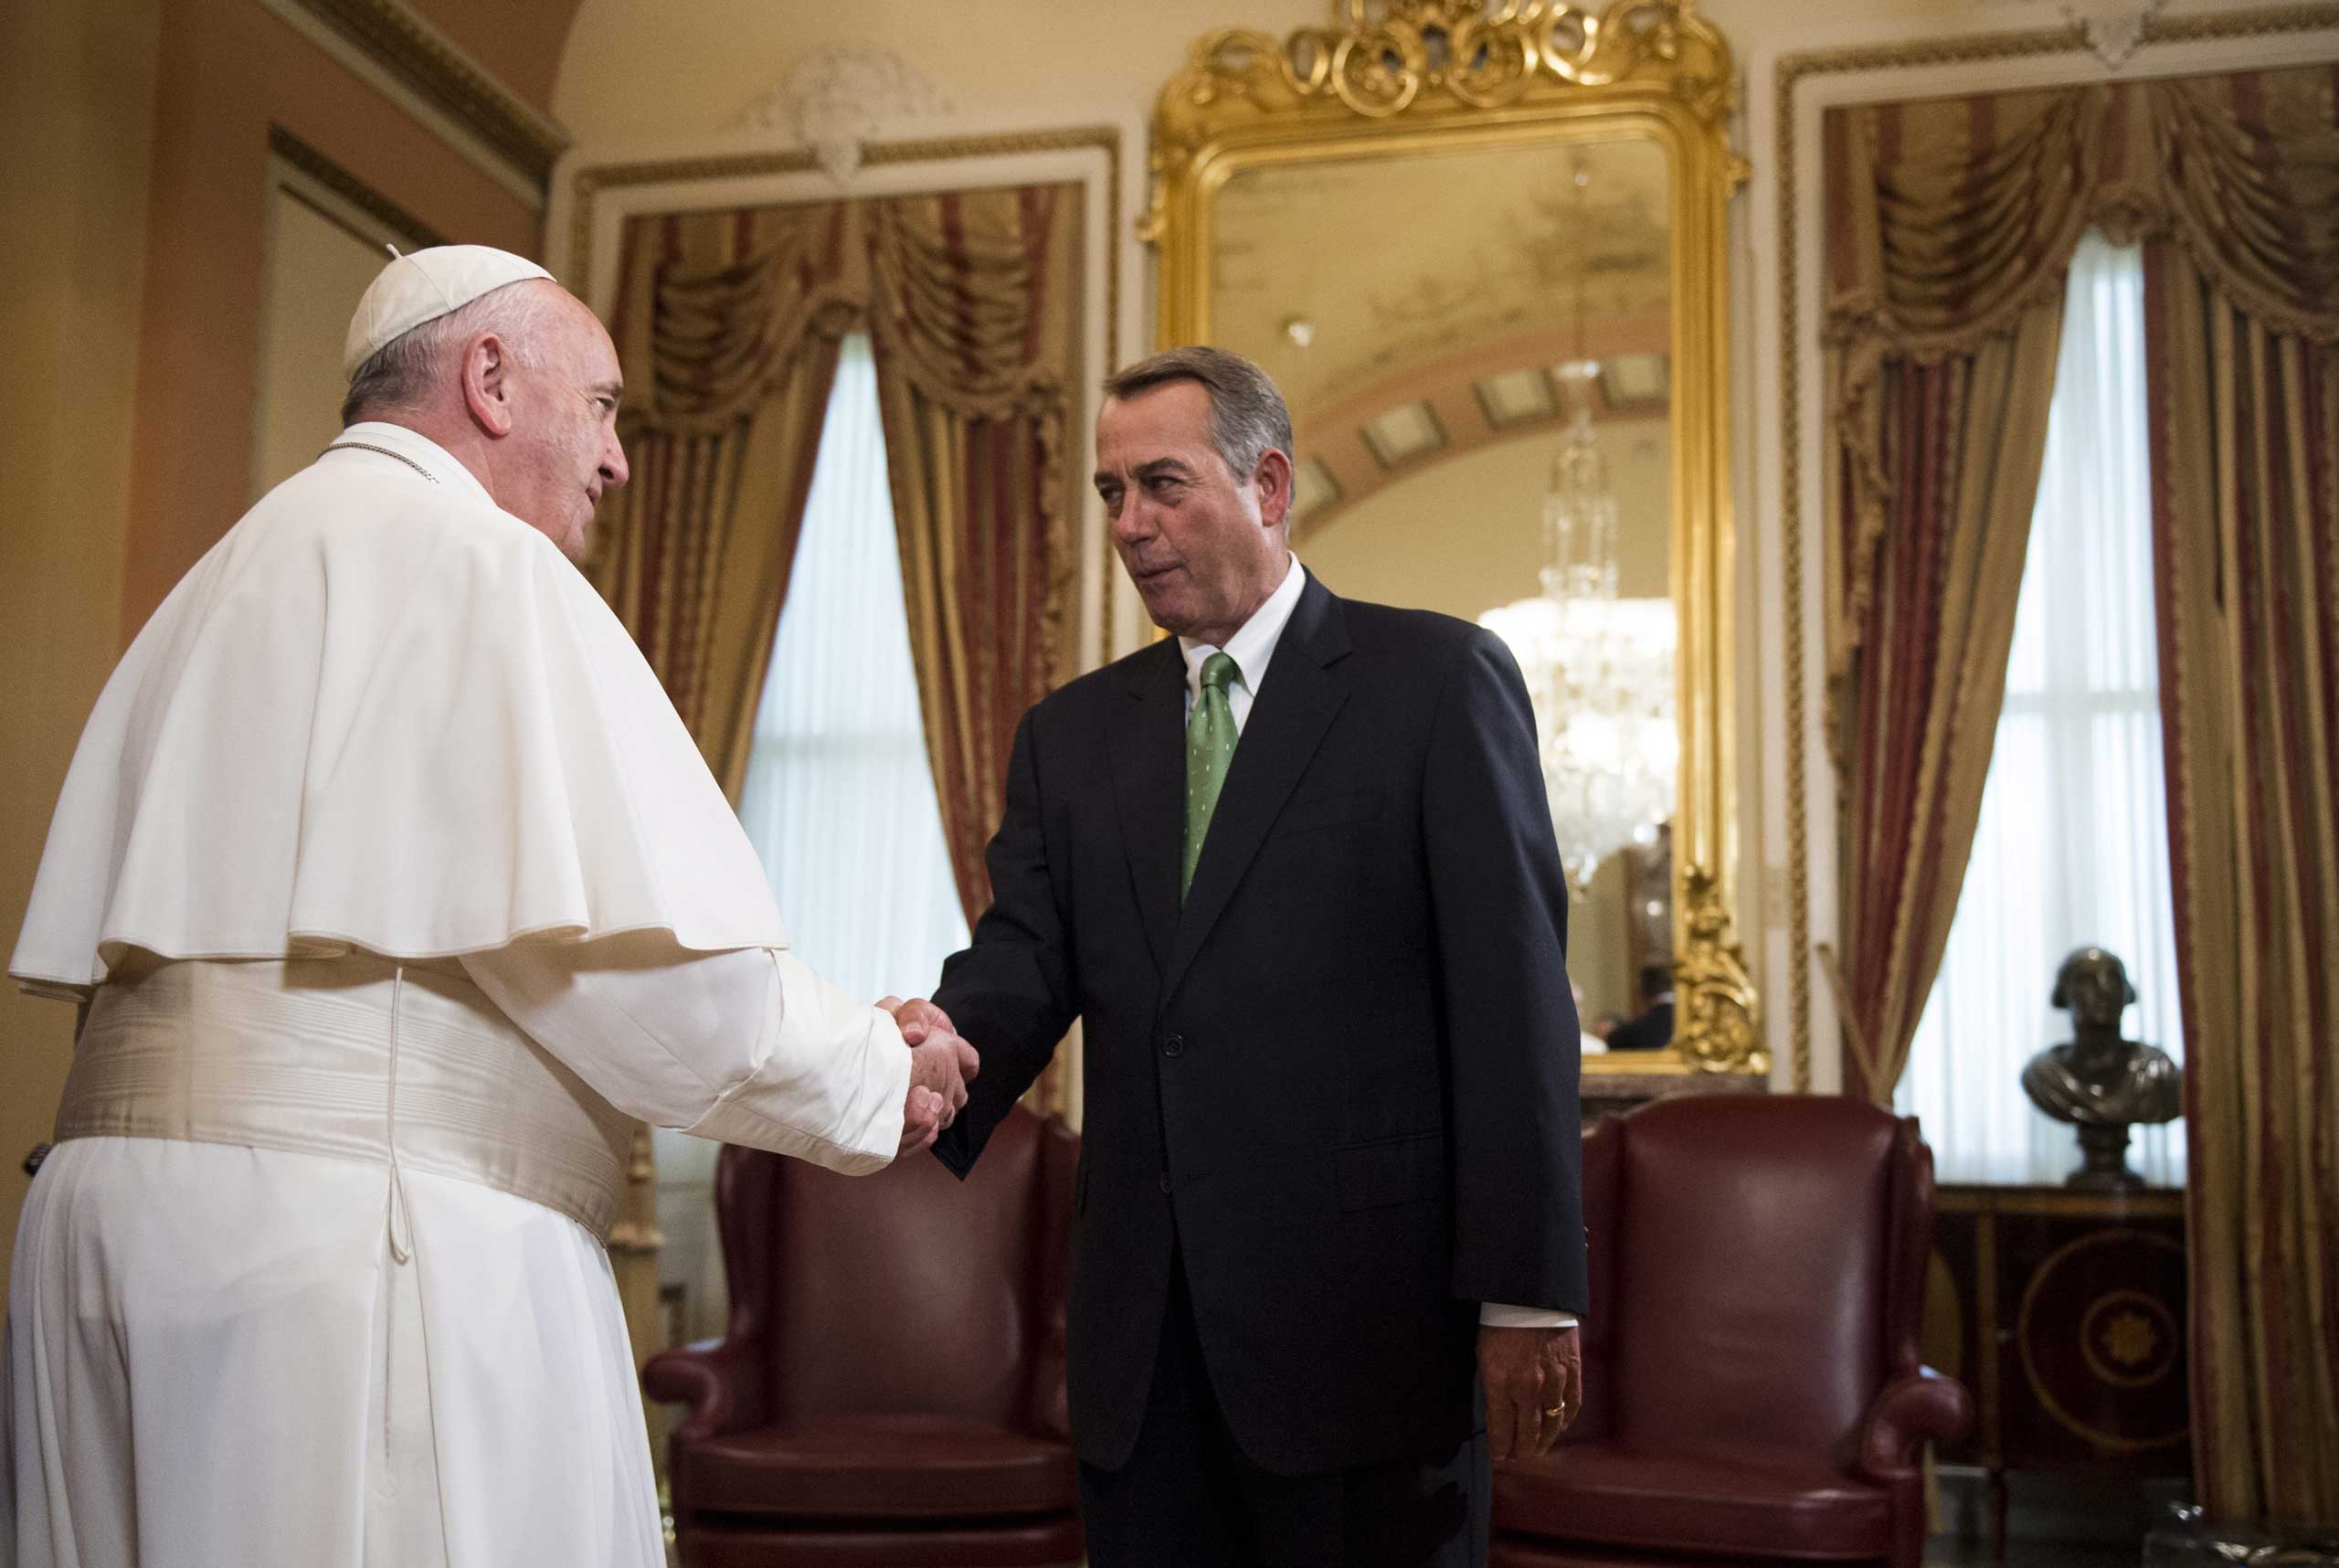 Pope Francis and Speaker of the House John Boehner speak in the US Capitol building as the Pope arrives to deliver his speech to a joint meeting of Congress in Washington, on Sept. 24, 2015.